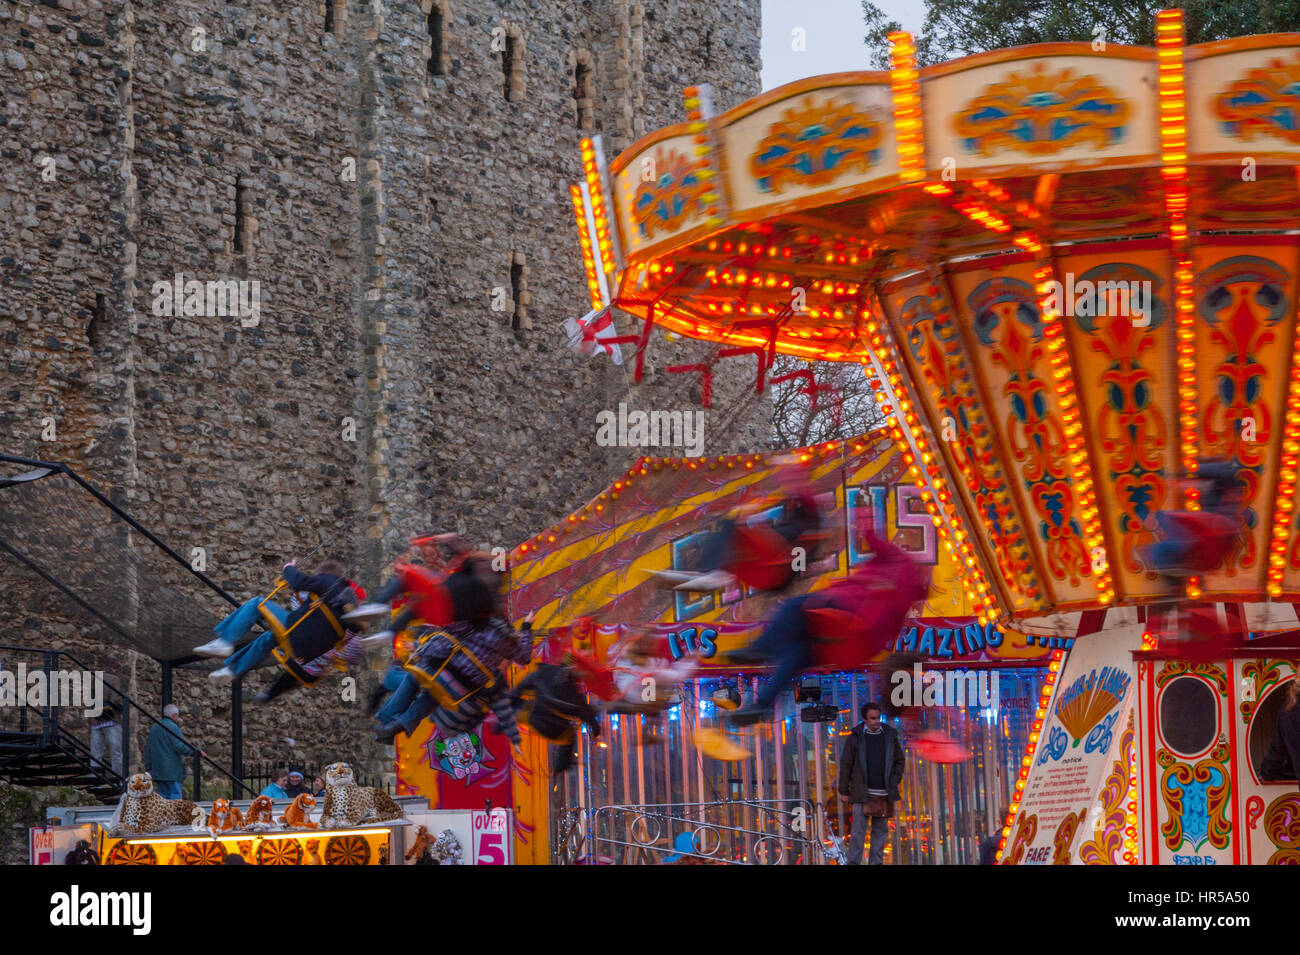 Fairground ride in the grounds of Rochester castle during Sweeps street festival. Stock Photo